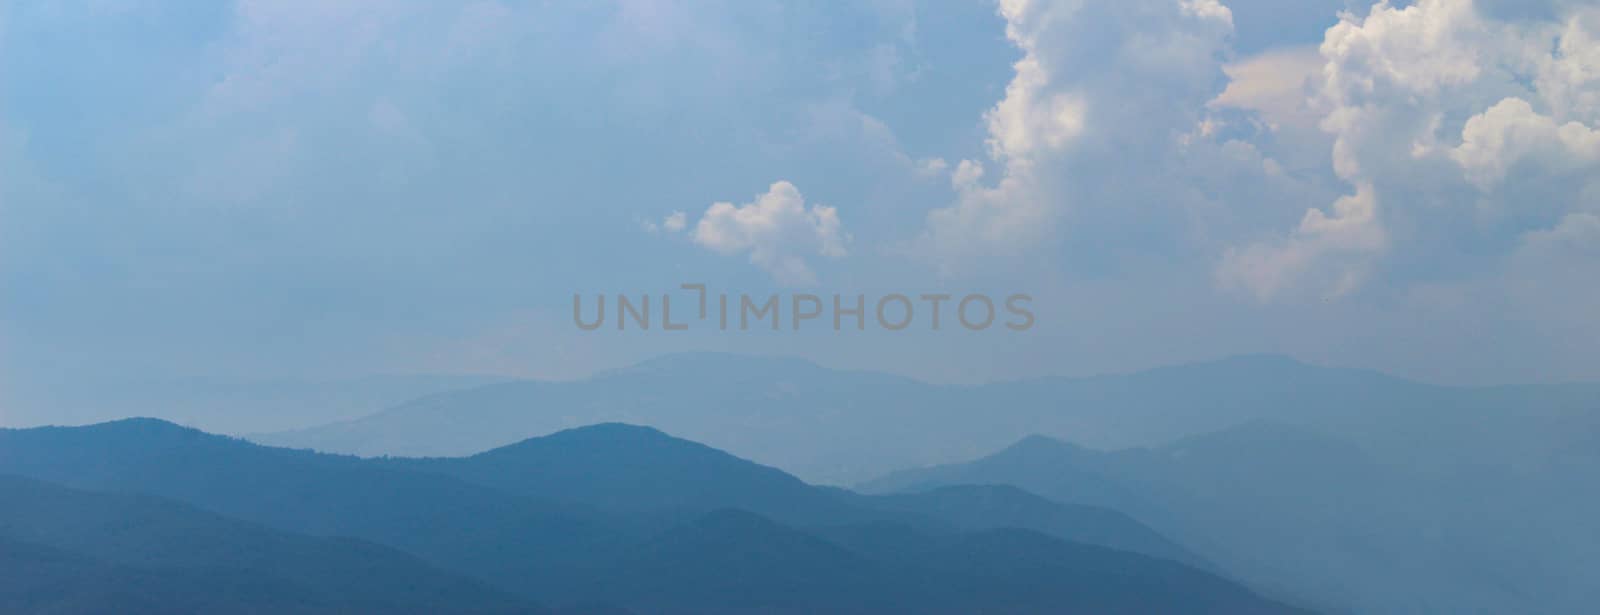 Banner. Blue silhouette of a mountain in the distance, with clouds in the blue sky. Mountains and hills in the distance. by mahirrov